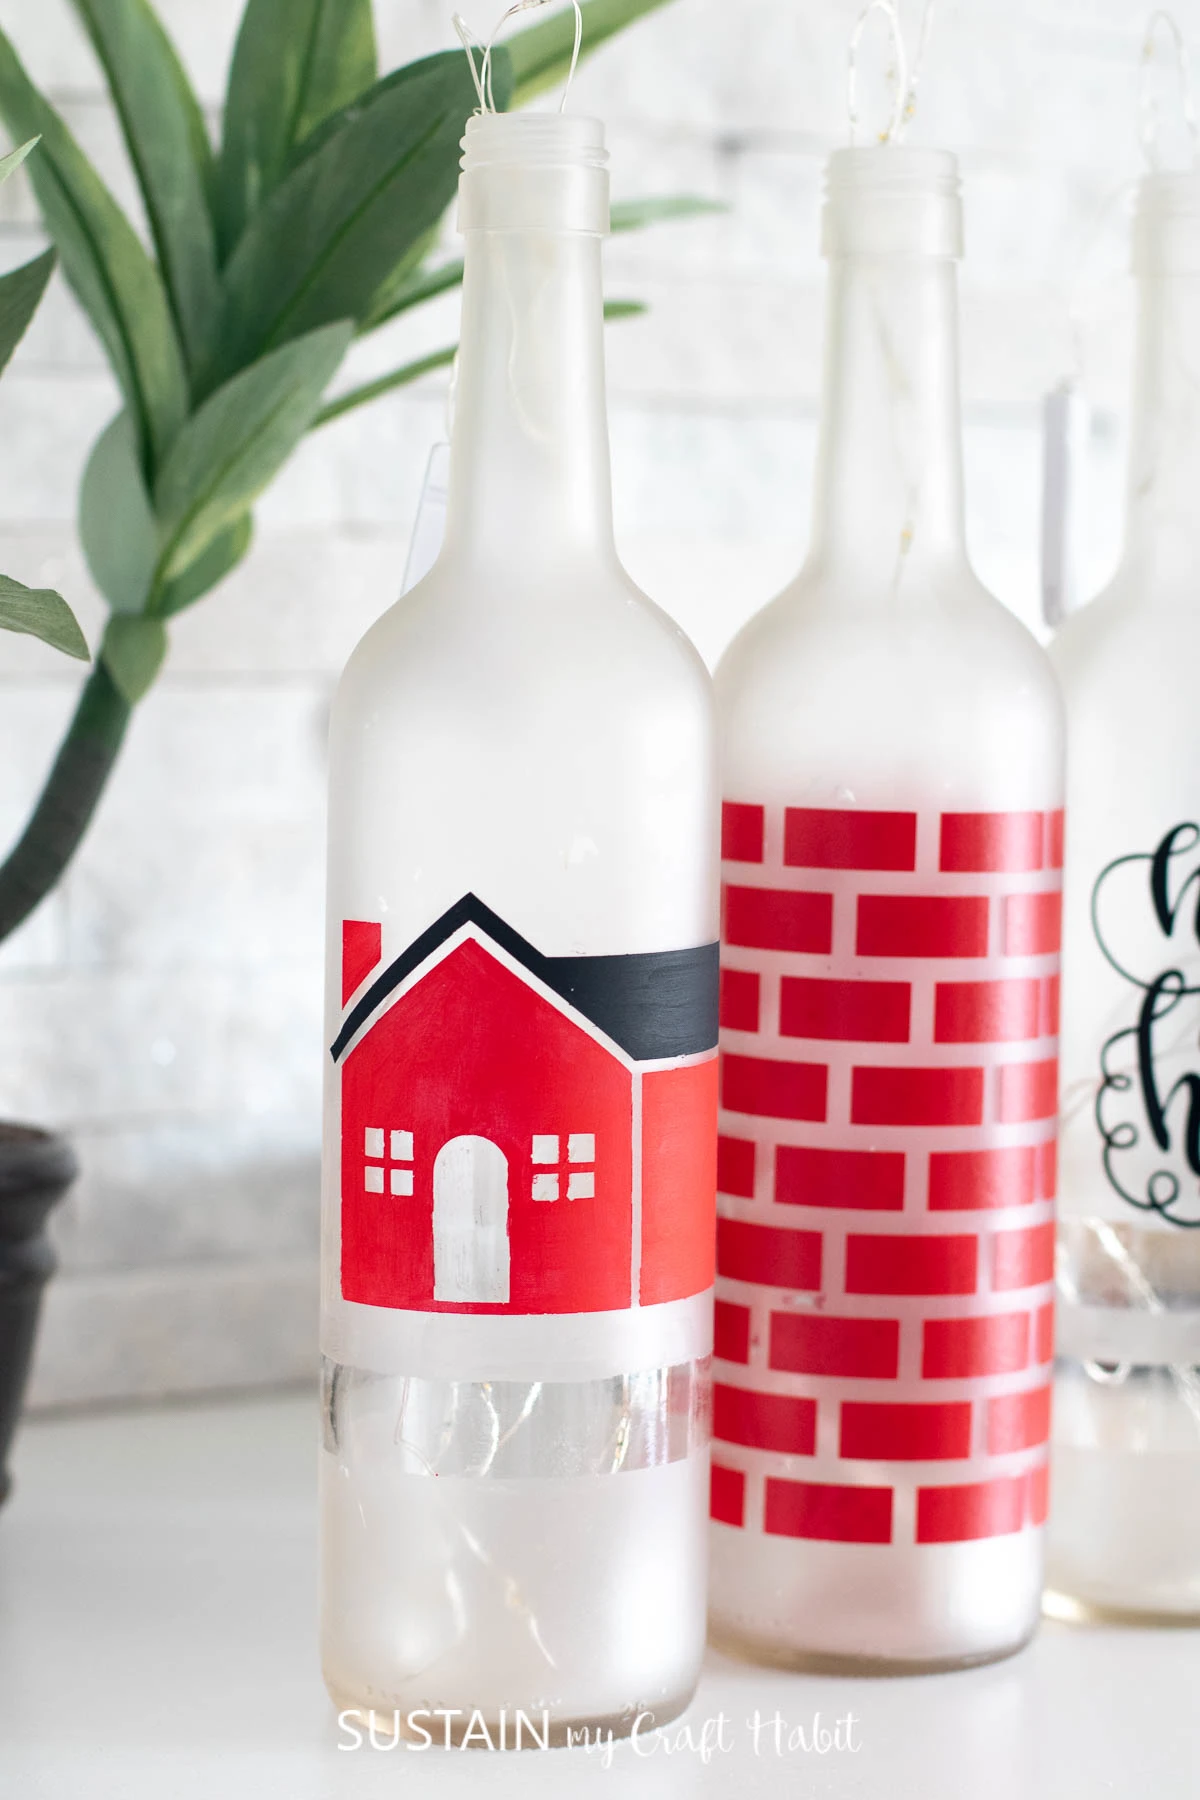 Close up image of the bottle painted with a red and white house using the vinyl stencil cut wiht the Cricut Maker.